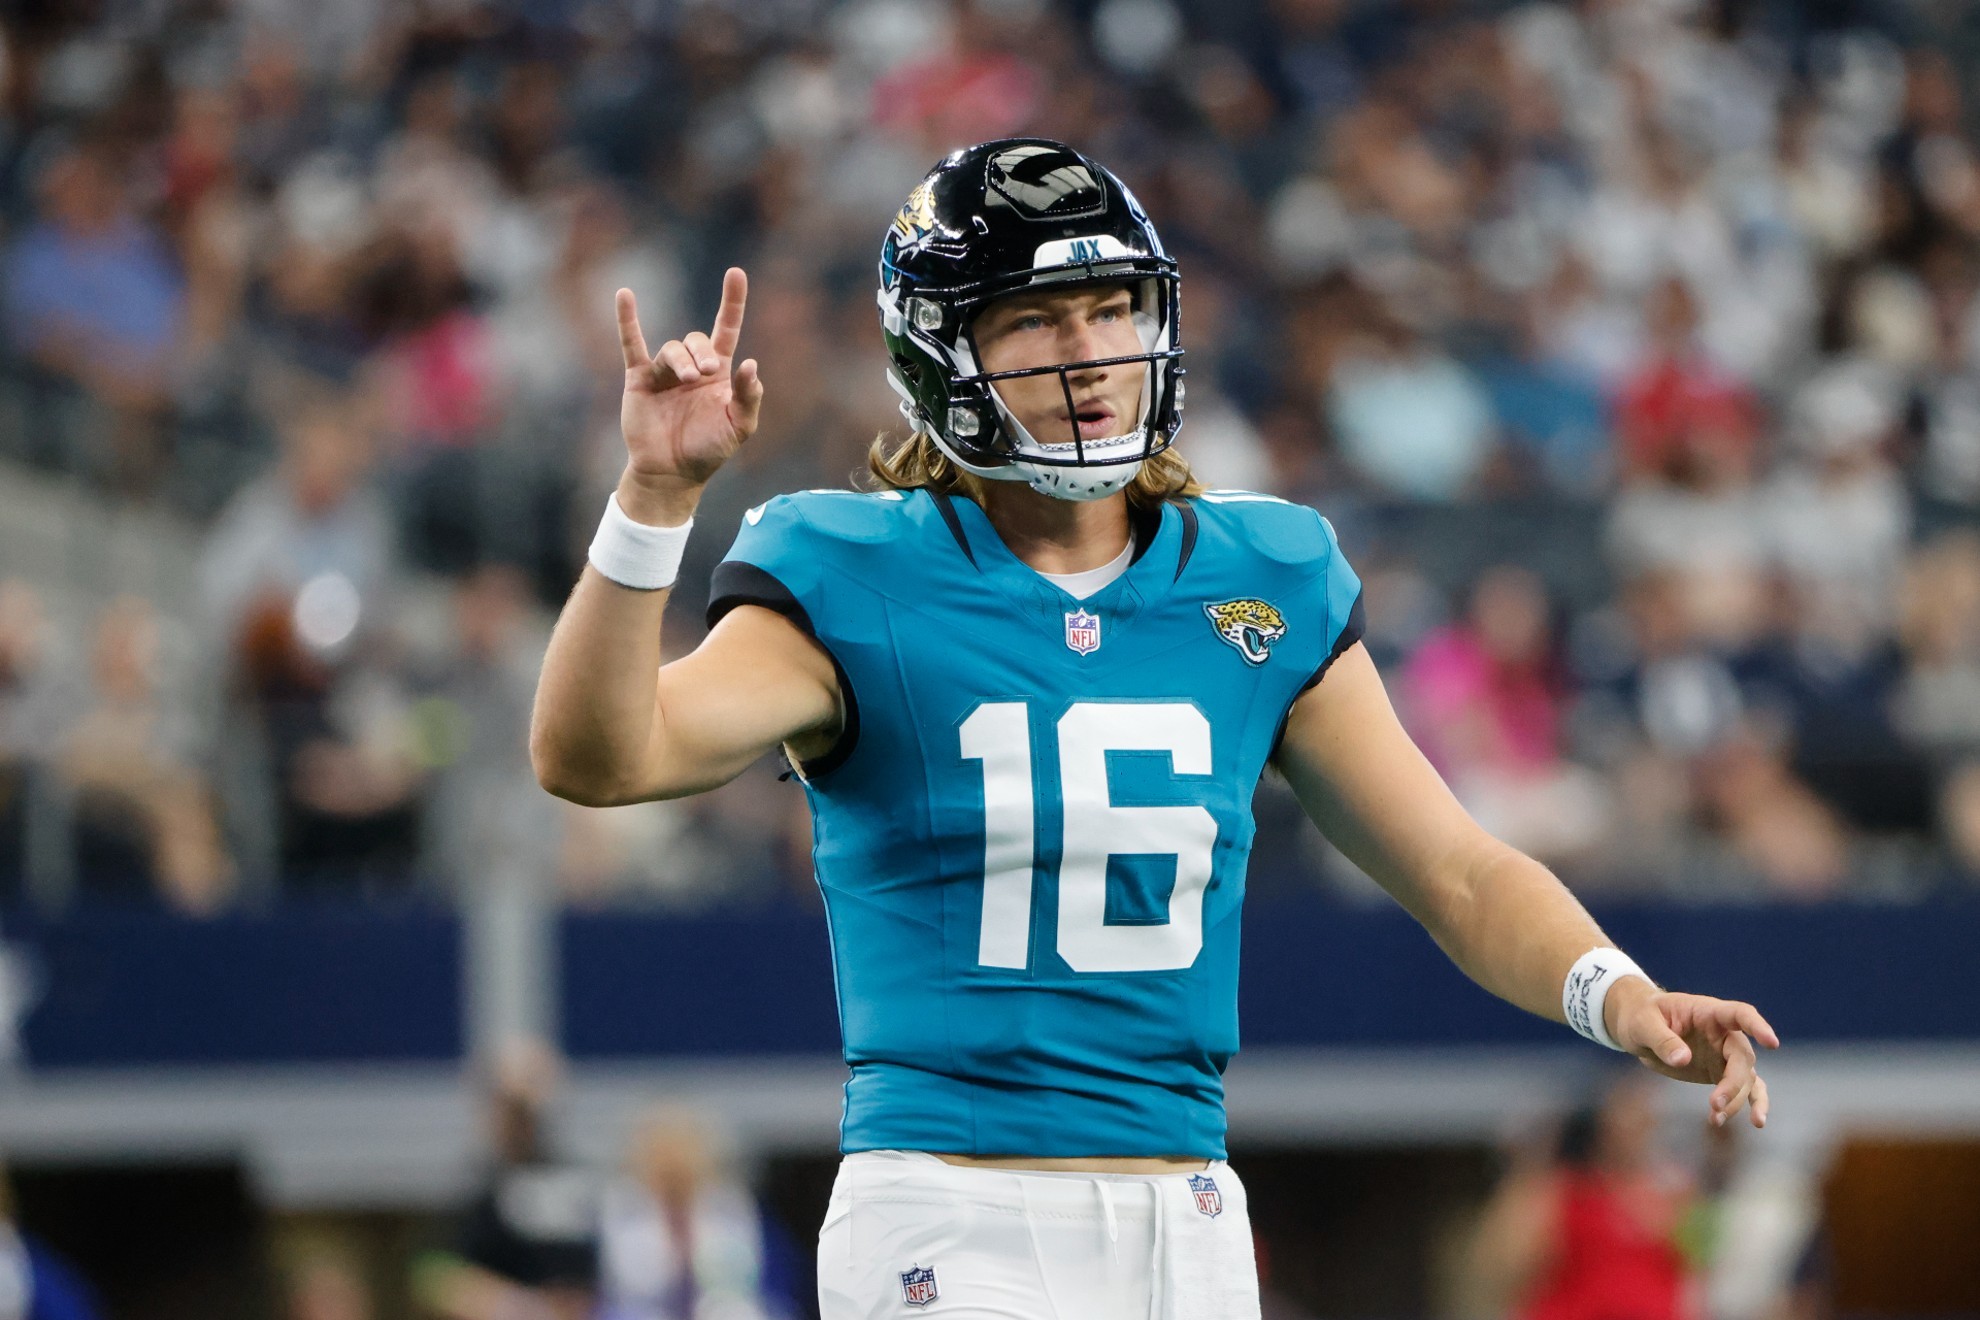 Doug Pederson: The confidence level with Trevor Lawrence is extremely high, as it should be